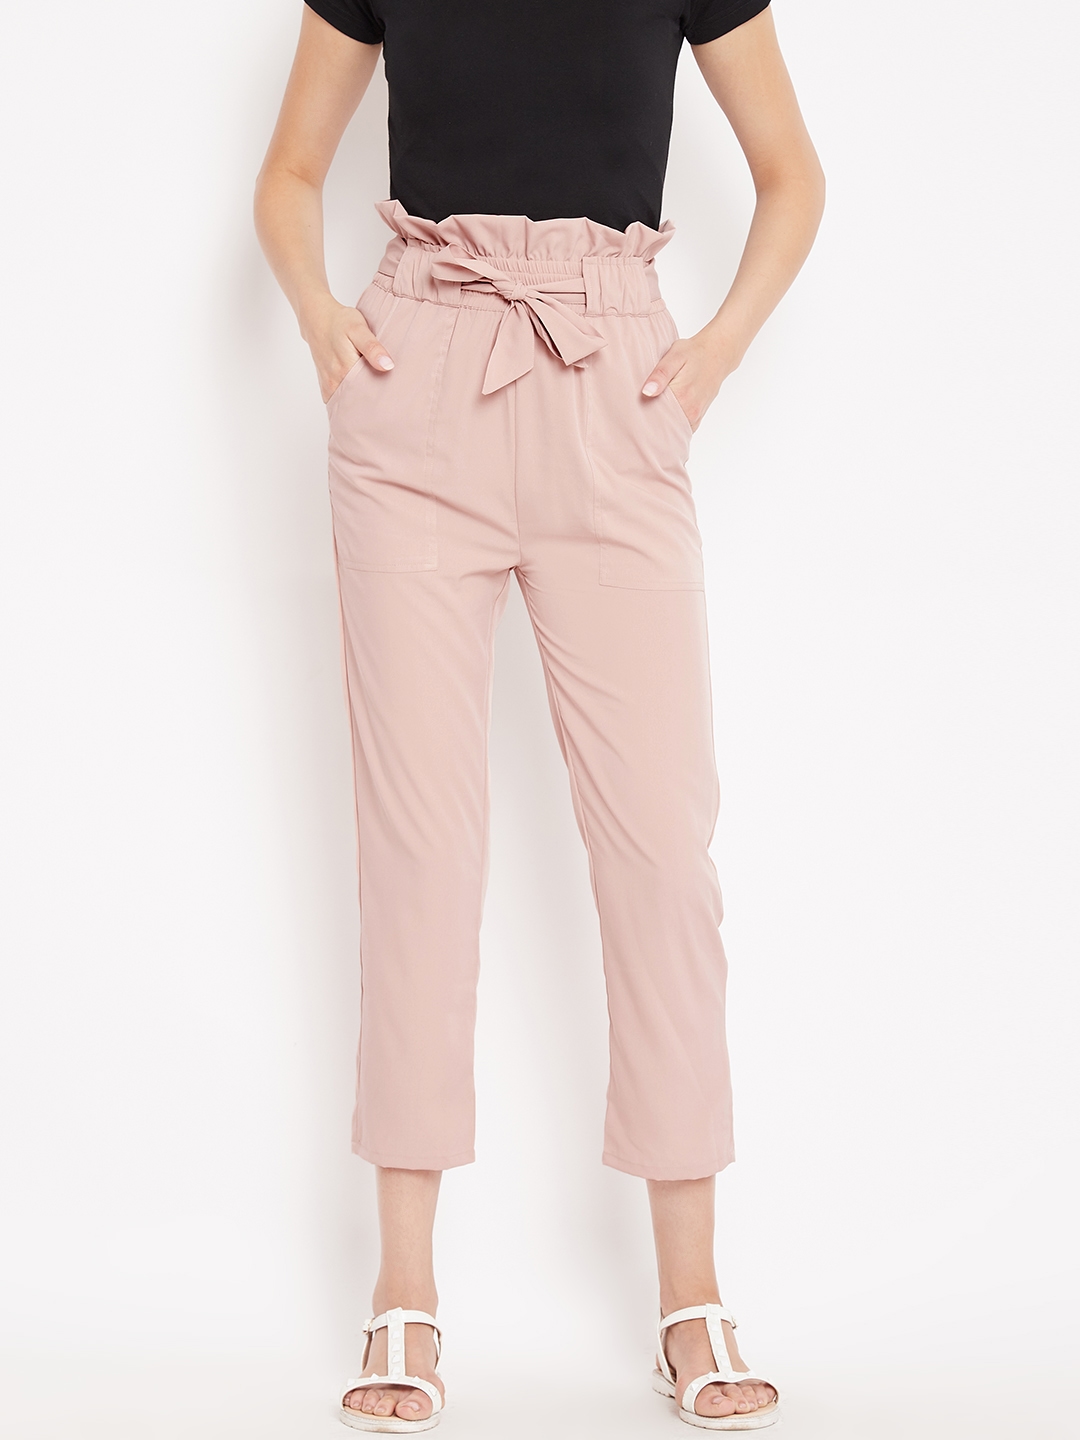 How To Style Topshop Check Peg Trousers  Daily Craving